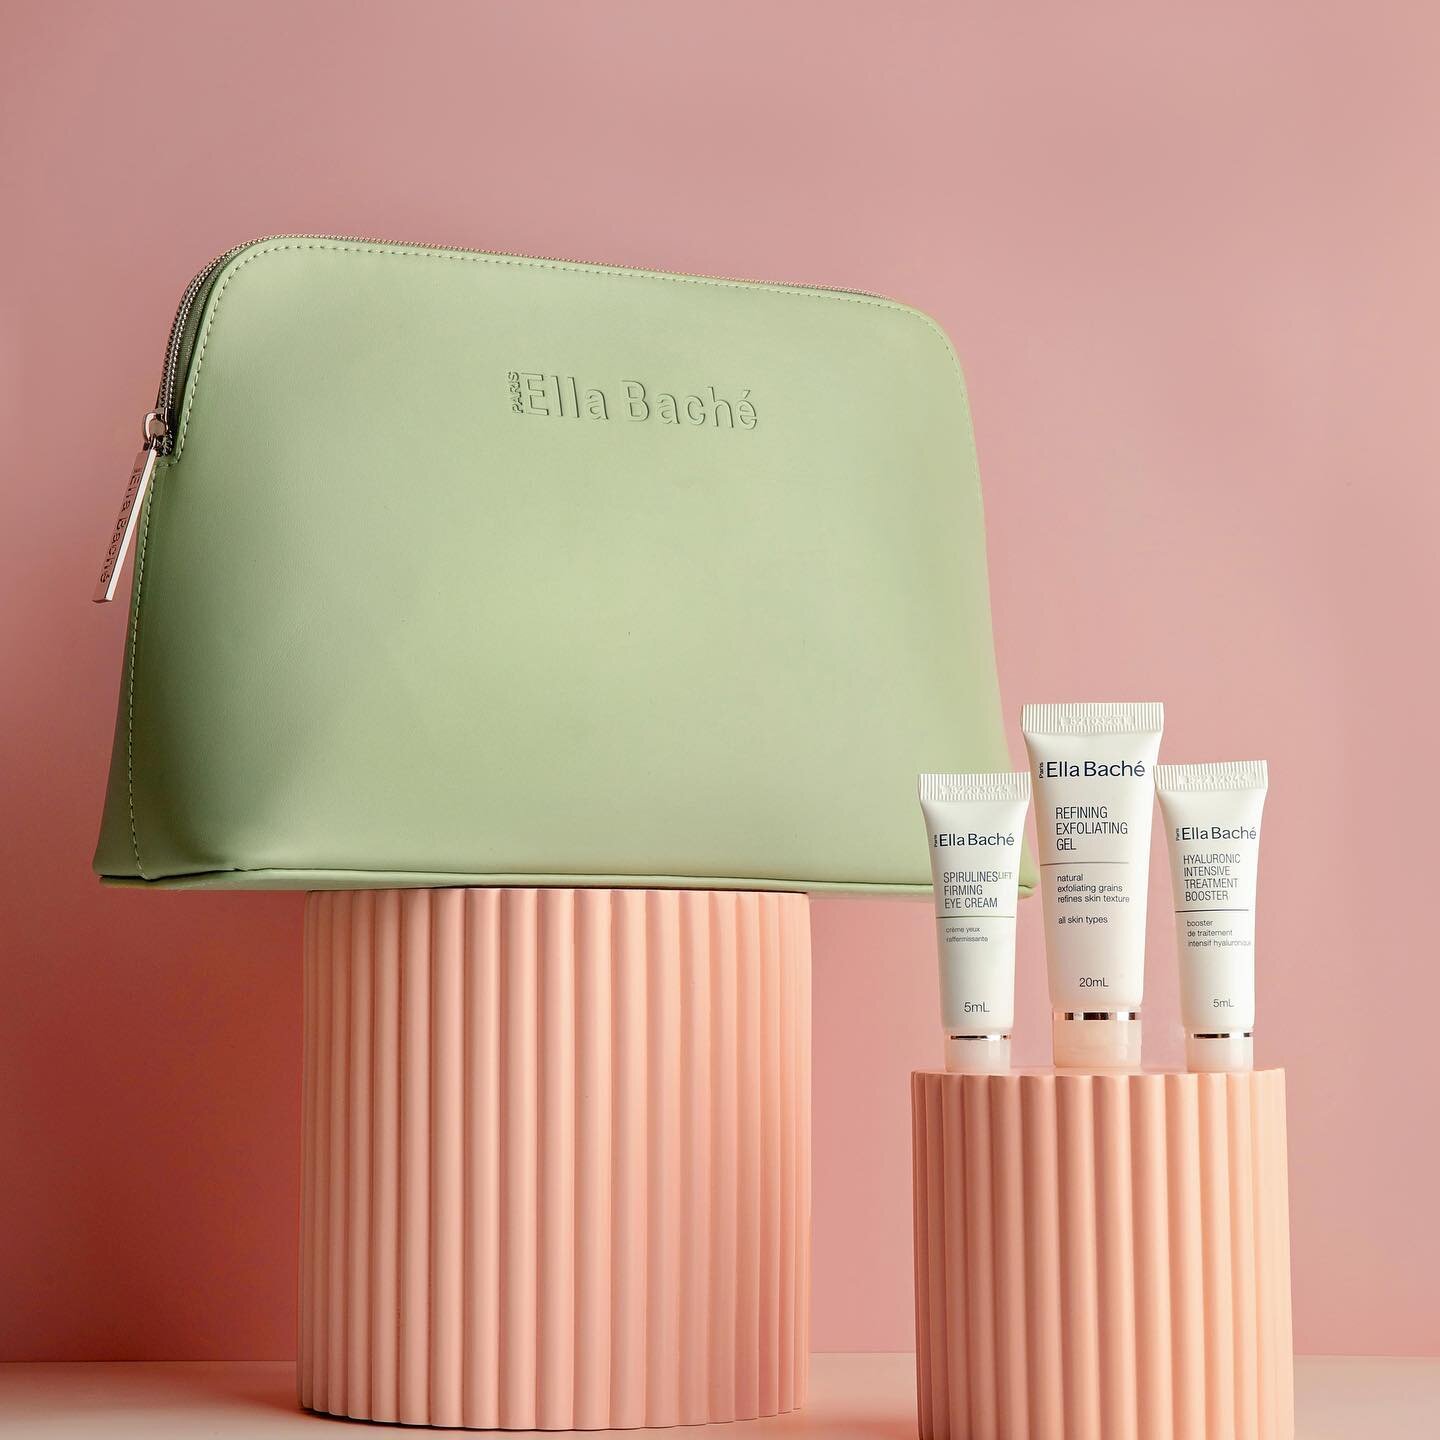 Our beautiful gift with purchase this month.

Buy 2 or more Ella Bach&eacute; skincare products and receive your complimentary SpirulinesLIFT BeautyCollection with Refining Exfoliating Gel, SpirulinesLIFT Firming eye cream, Hyaluronic Intensive Treat